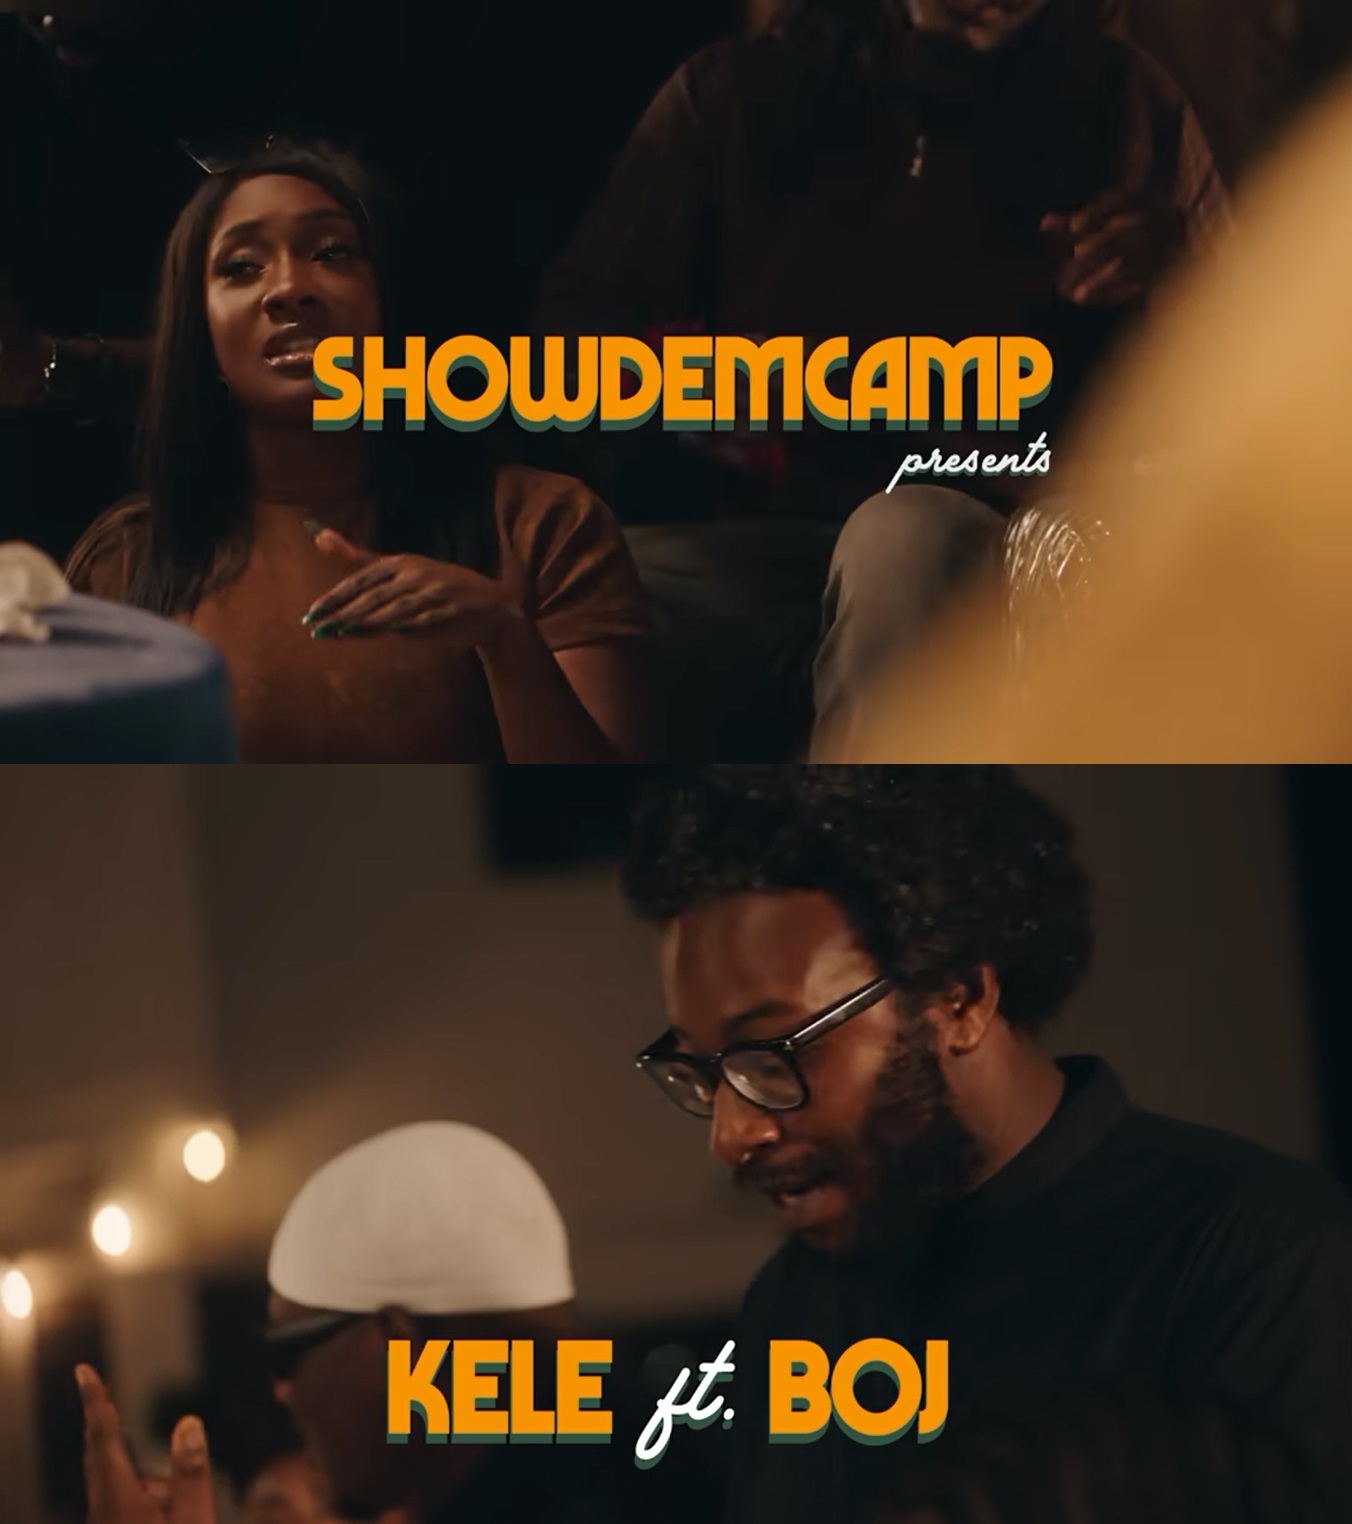 Show Dem Camp Unveils &Quot;Kele&Quot; Music Video Featuring Boj From Palmwine Music 3 Series, Yours Truly, News, October 4, 2023